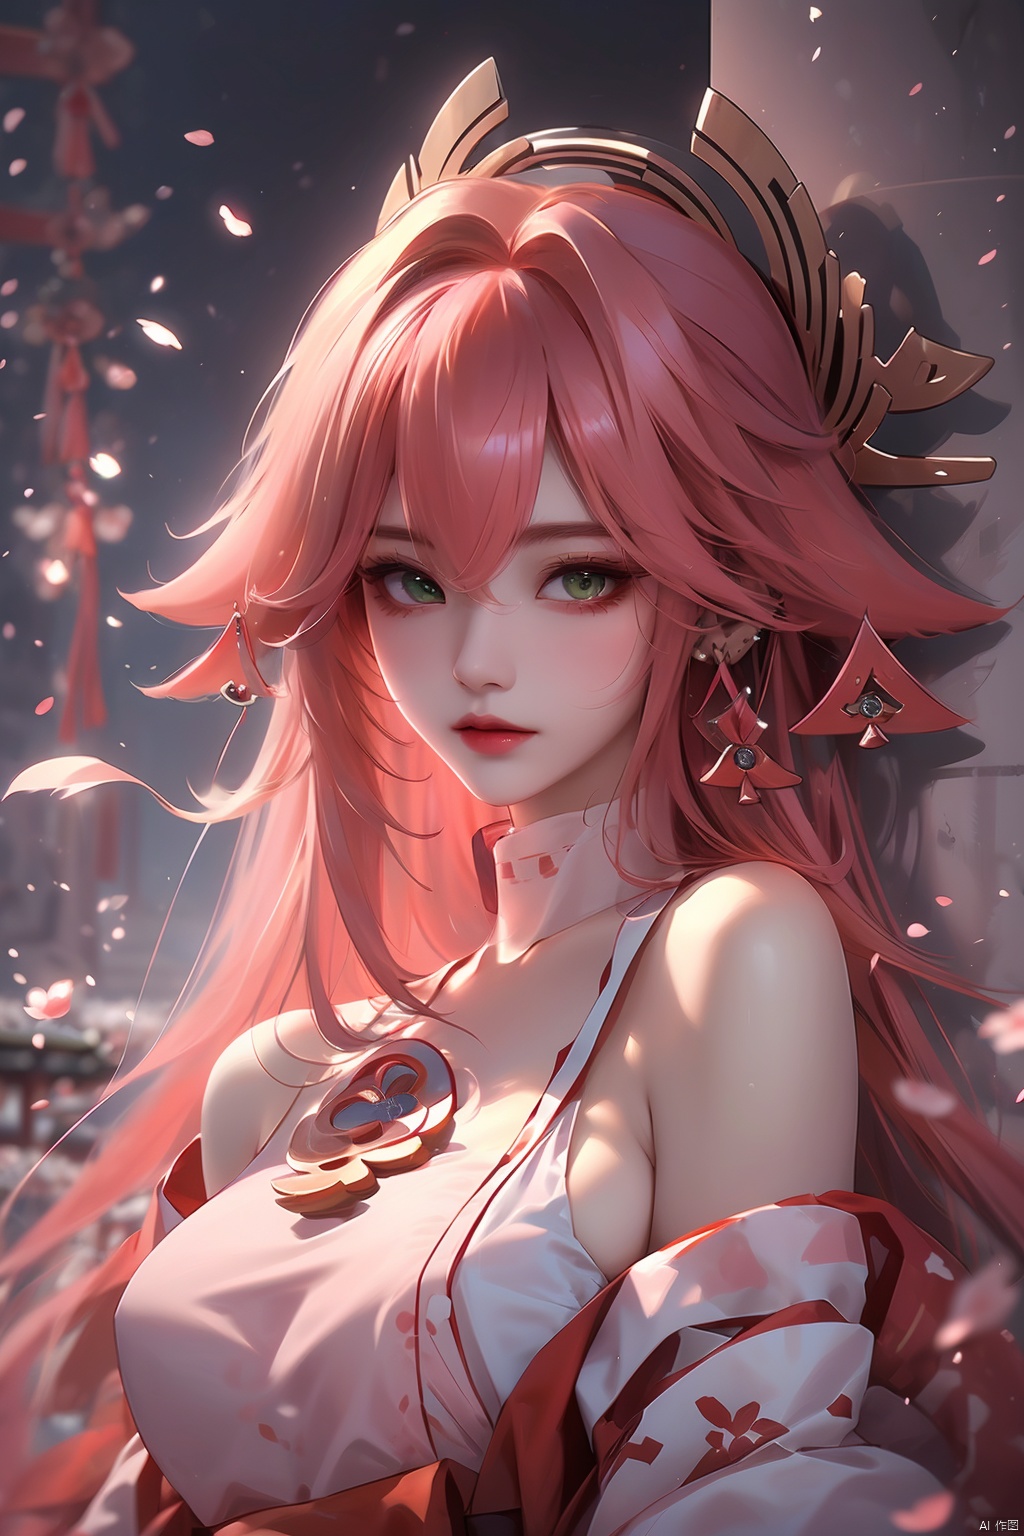  (Masterpiece, Excellent, 1girl, solo, complex details, color difference), realism, ((medium breath)), off-the-shoulders, big breasts, sexy, Yae Miko, long pink hair, red headdress, red highlight, hair above one eye, green eyes, earrings, sharp eyes, perfectly symmetrical figure, choker, neon shirt, open jacket, turtleneck sweater, against the wall, brick wall, graffiti, dim lighting, alley, looking at the audience, ((mean, seductive, charming)), ((cherry blossom background ))),((Japanese temple background)))), (((Glow-in-the-dark background))), yae miko, (\meng ze\)